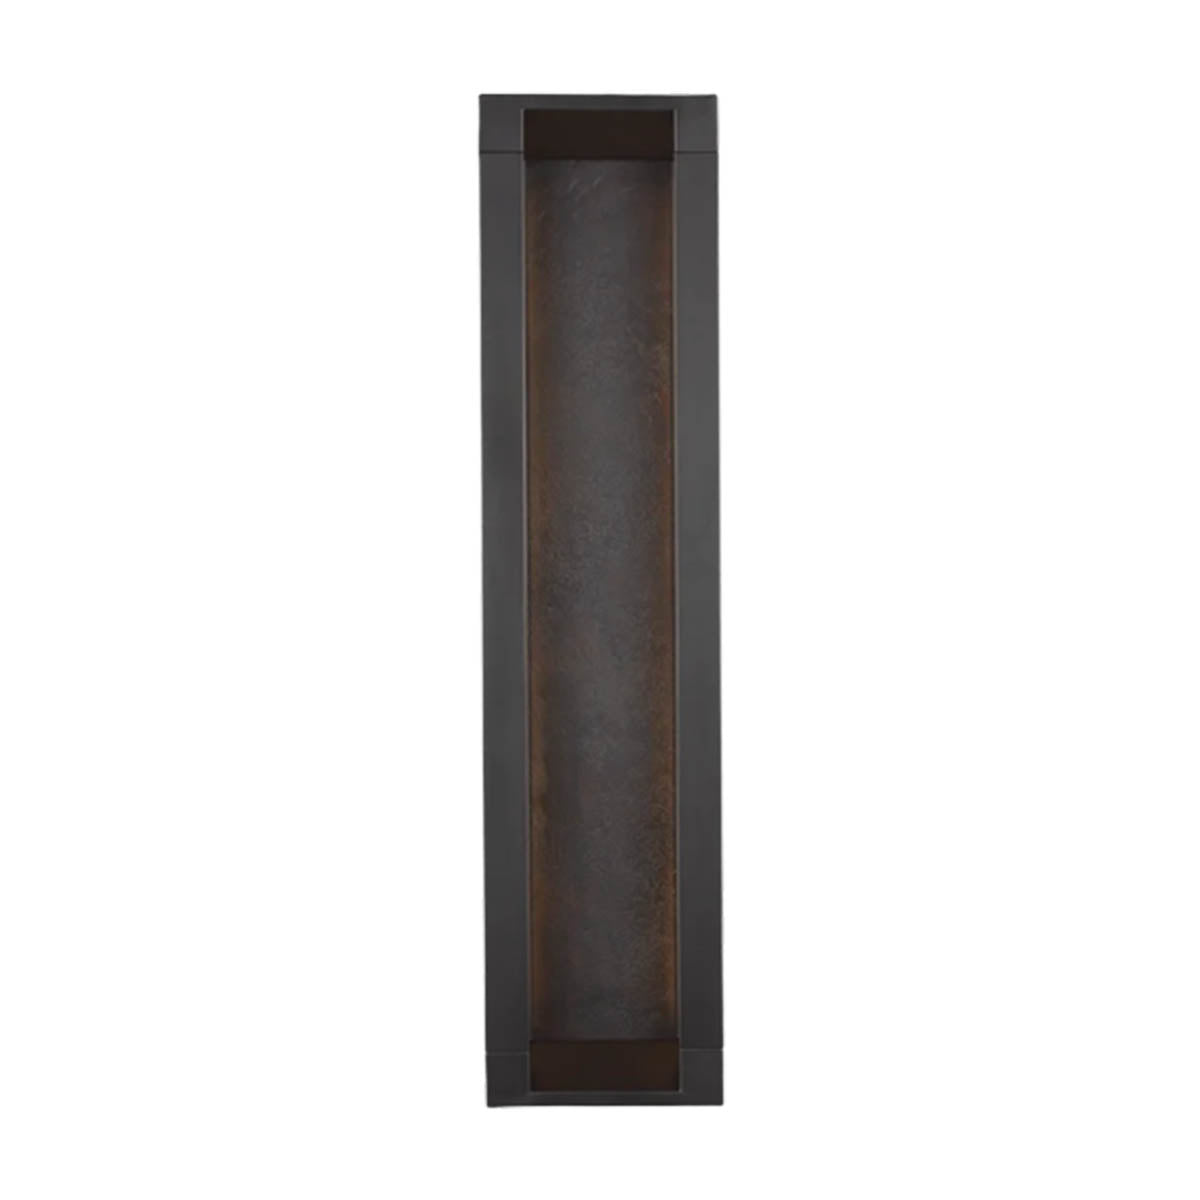 Mattix 26 In. LED Wall Sconce Oil Rubbed Bronze Finish